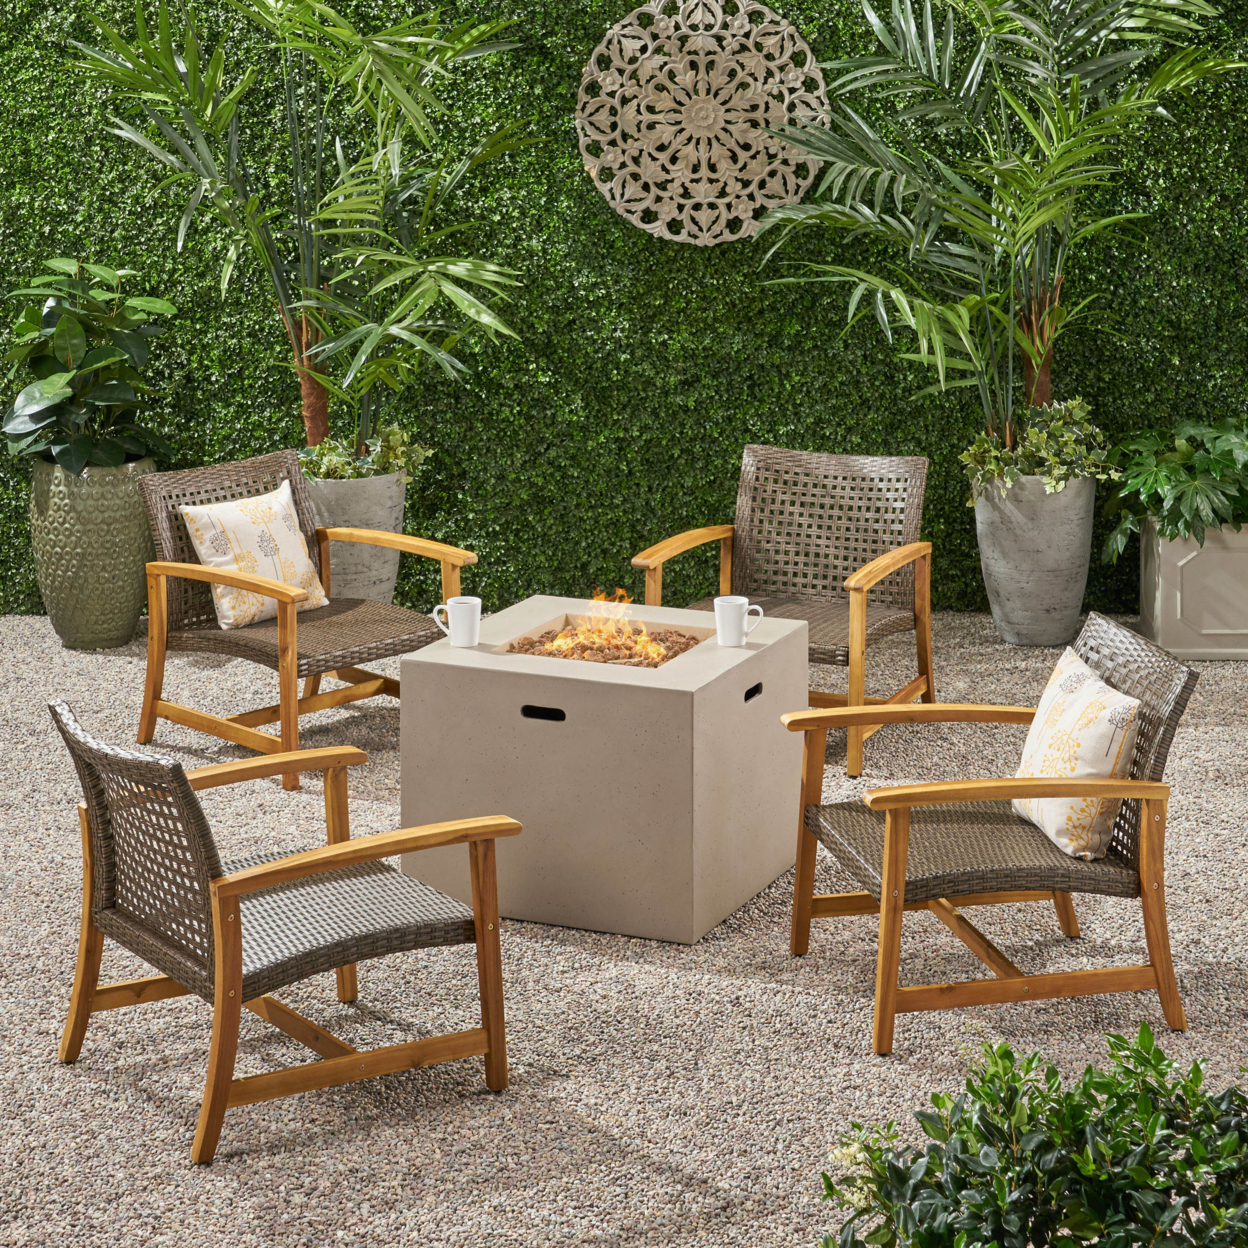 Debra Outdoor 5 Piece Wood And Wicker Club Chairs And Fire Pit Set - Mixed Mocha, Natural Finish, Light Gray